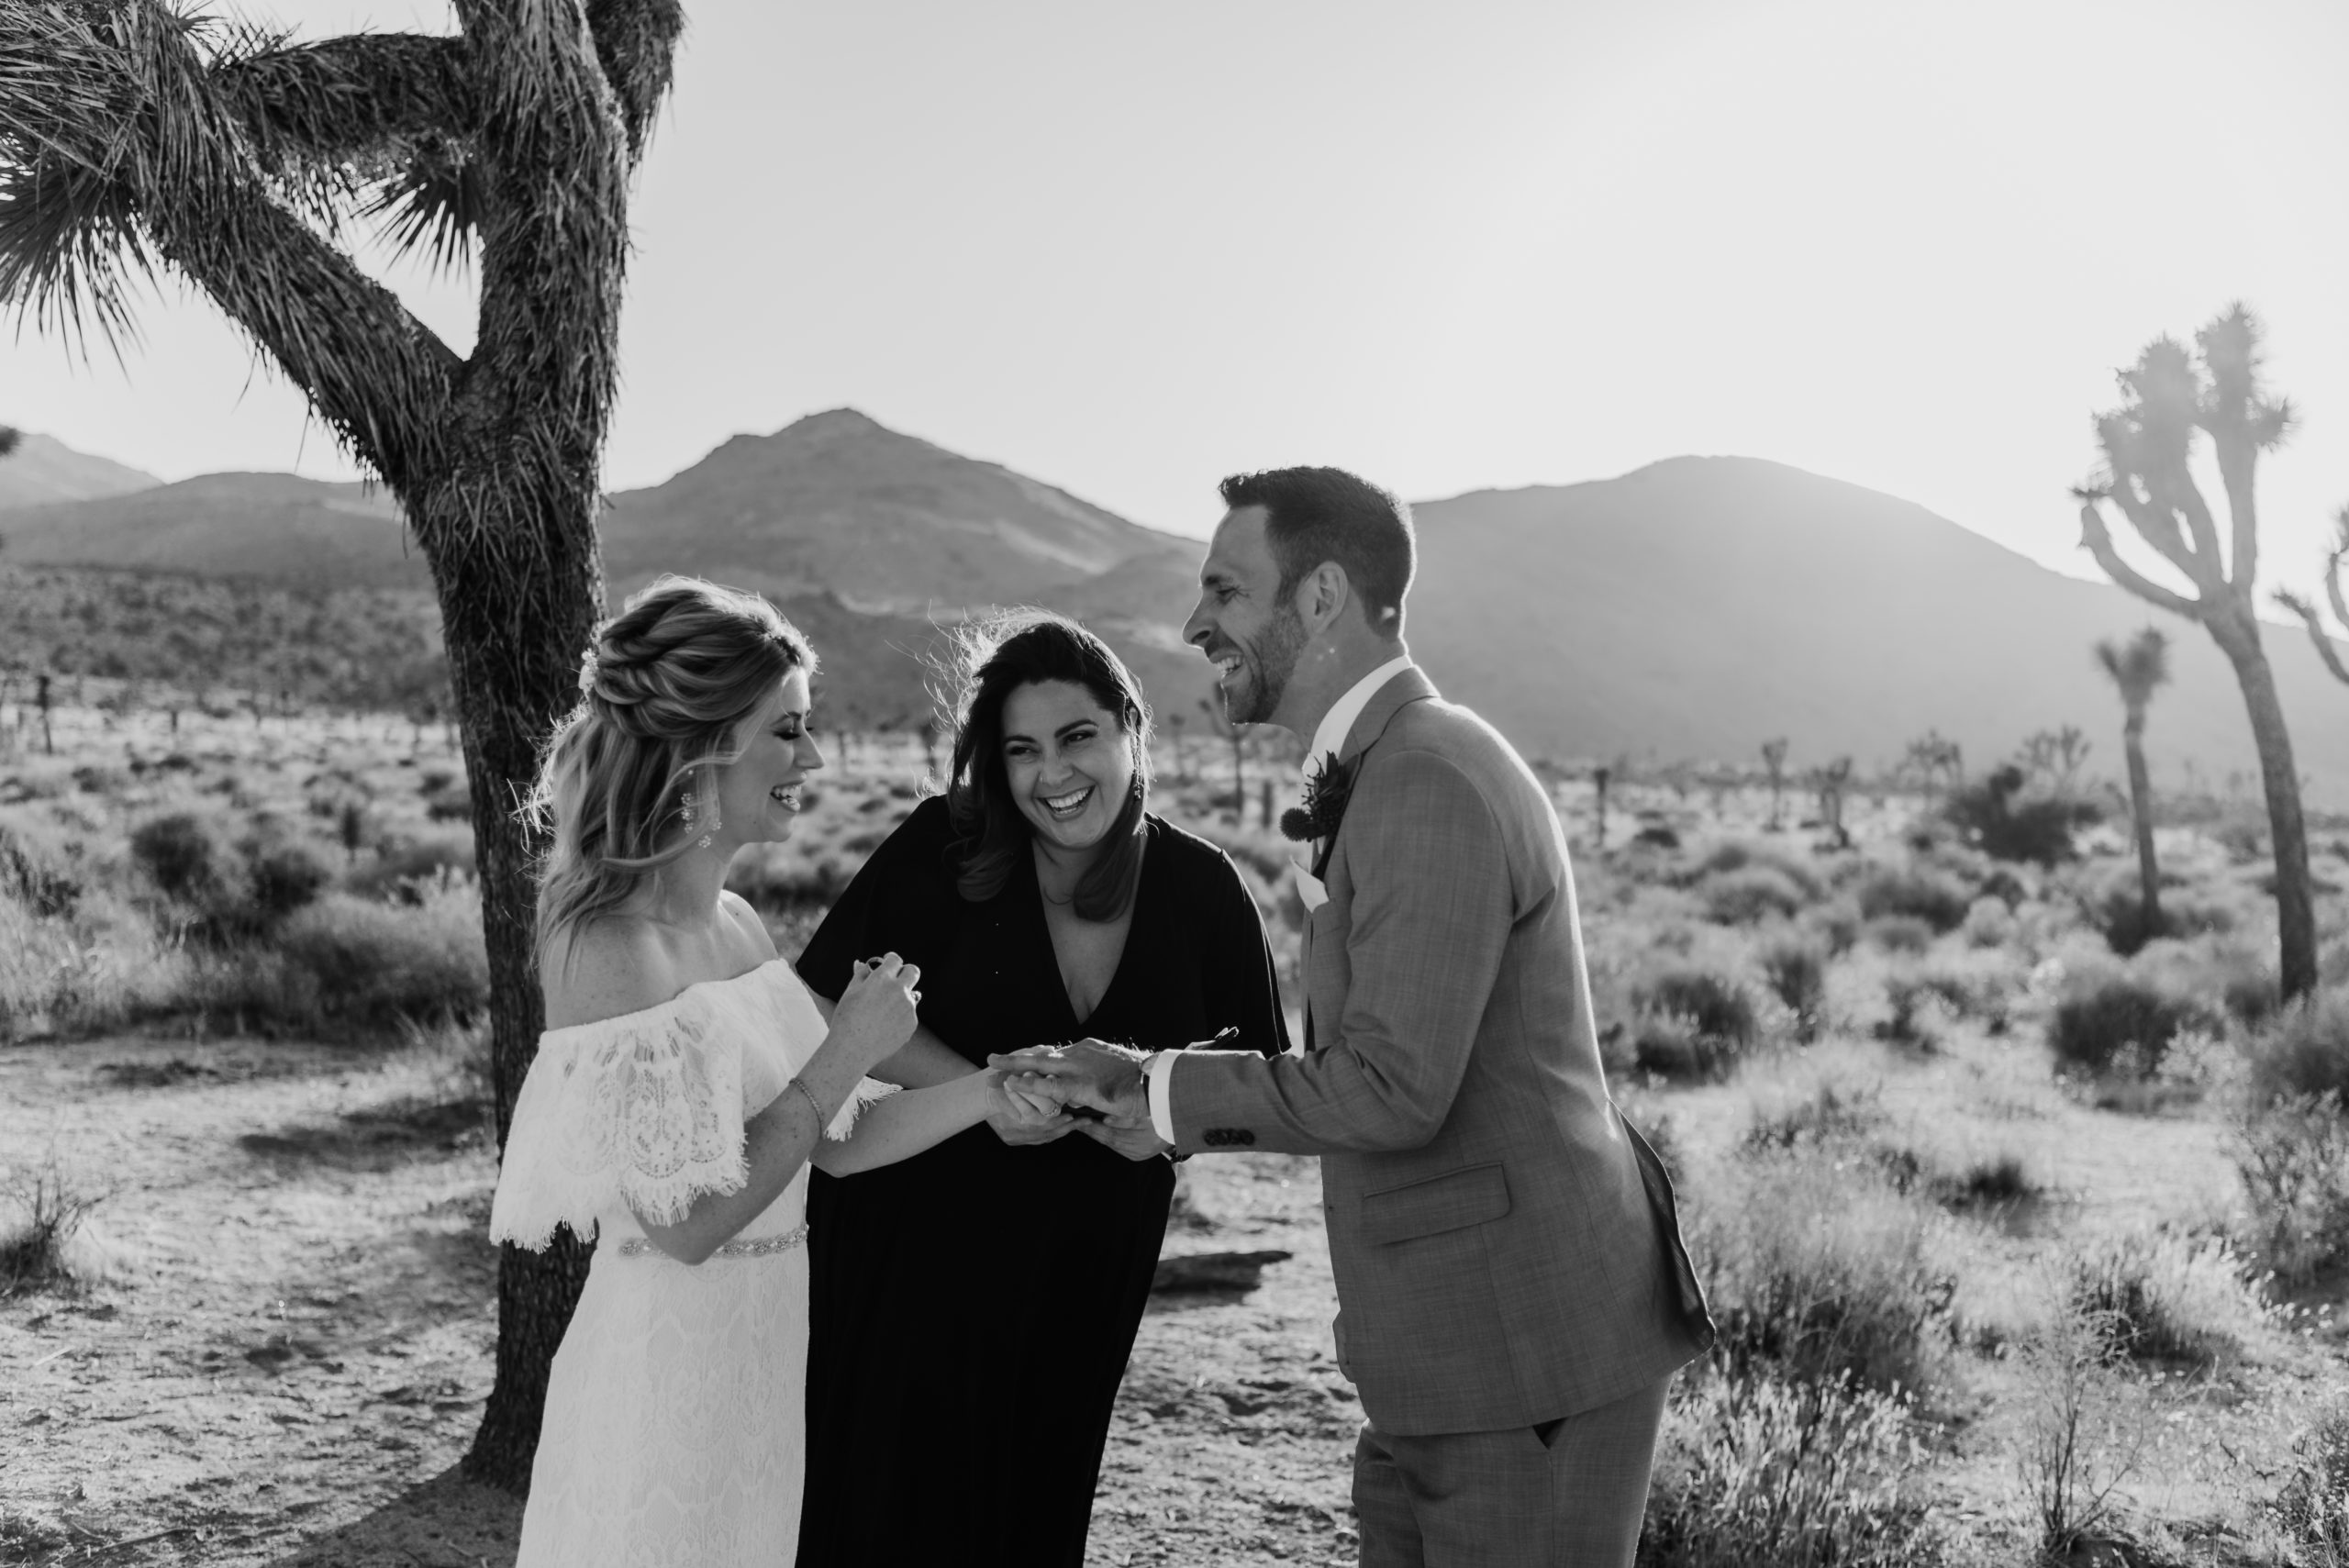 Let's Get Married by Marie laughs while performing a Joshua Tree elopement package for a smiling bride in a white boho dress and a laughing groom in a gray suit in Joshua Tree National Park